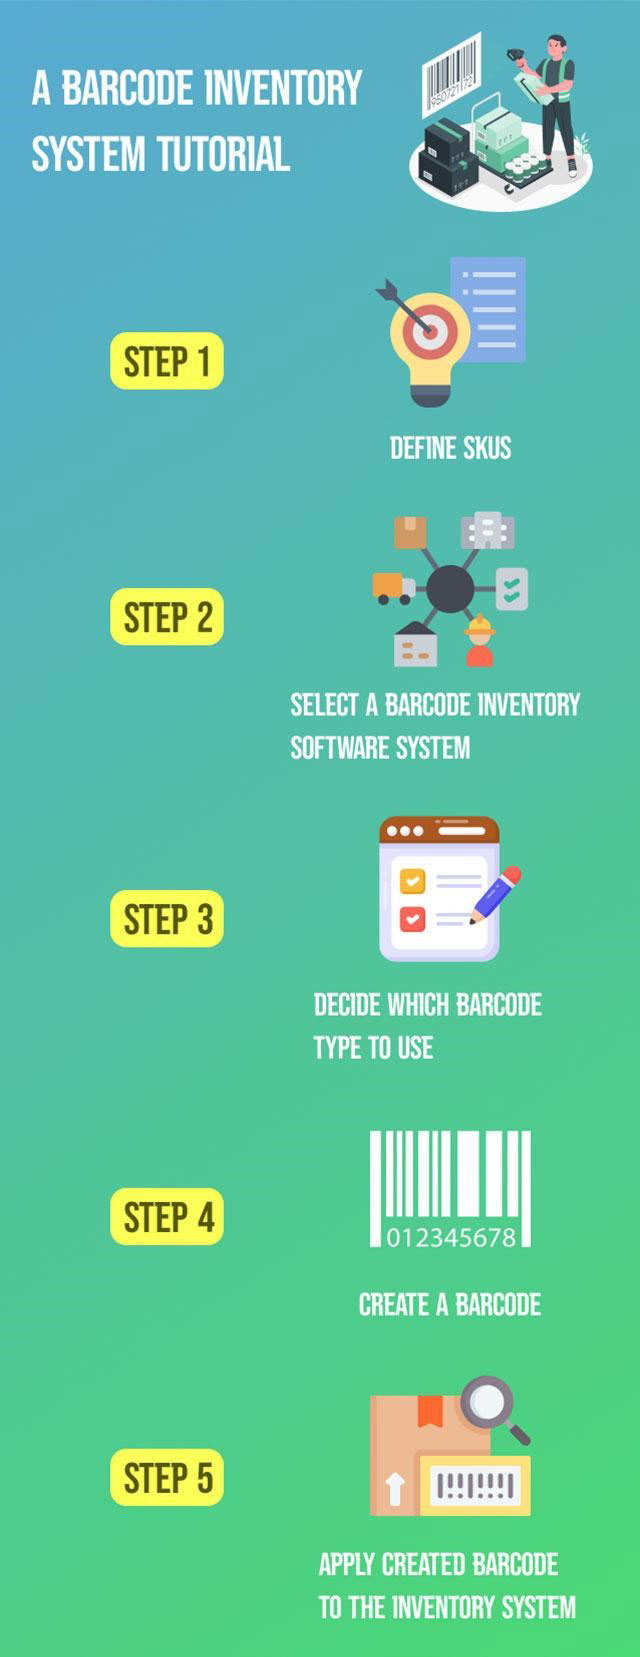 A barcode inventory system tutorial